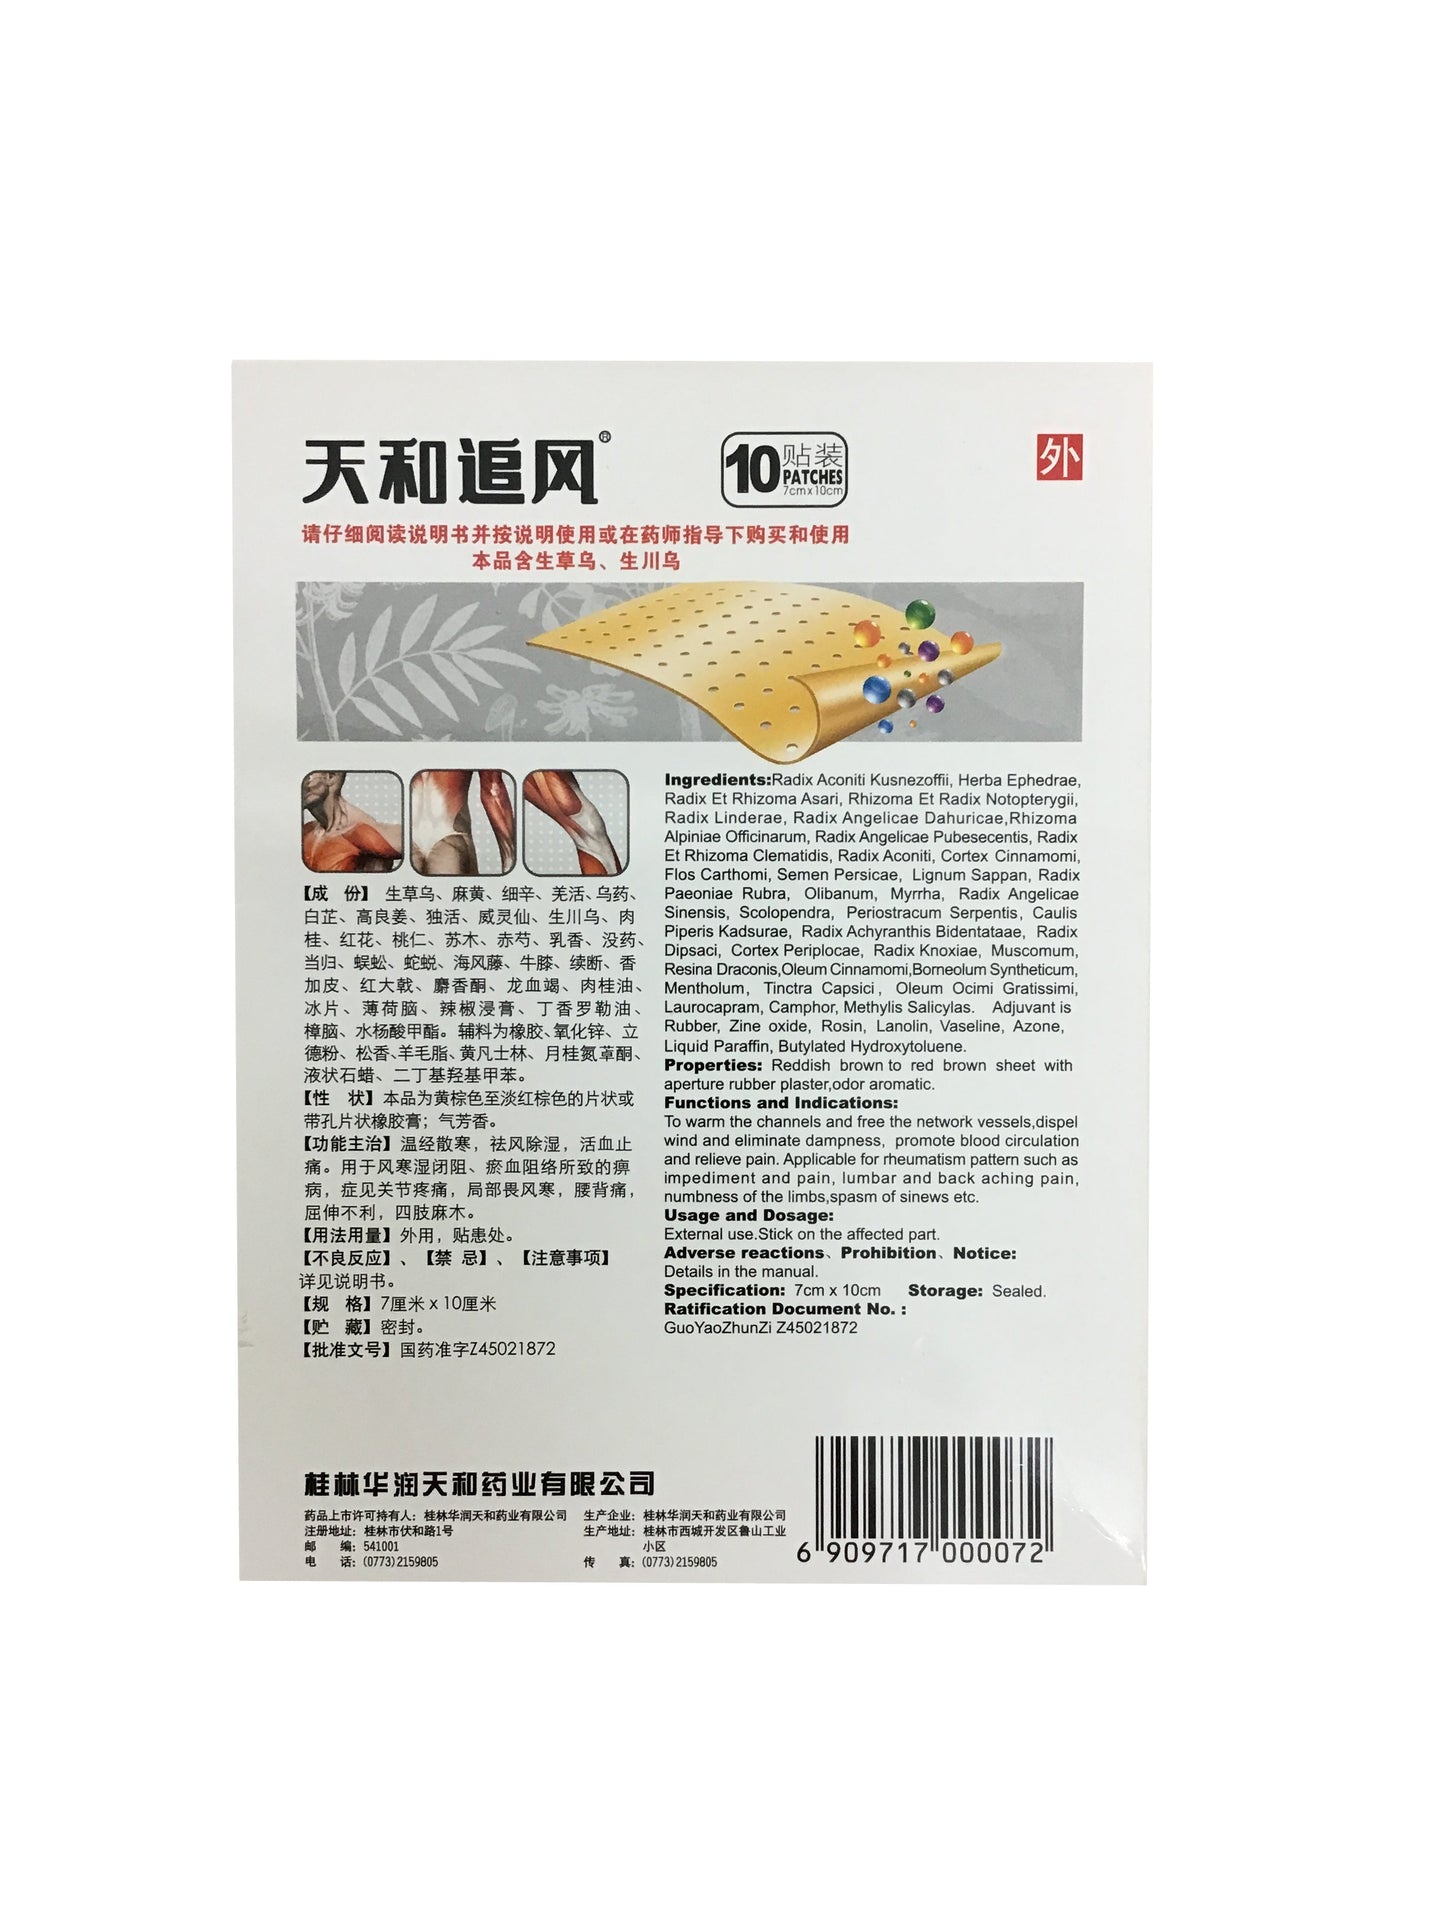 Tianhe Zhufeng Gao Pain Relieving Plaster (10 Plasters) 天和追风膏 (10贴装）